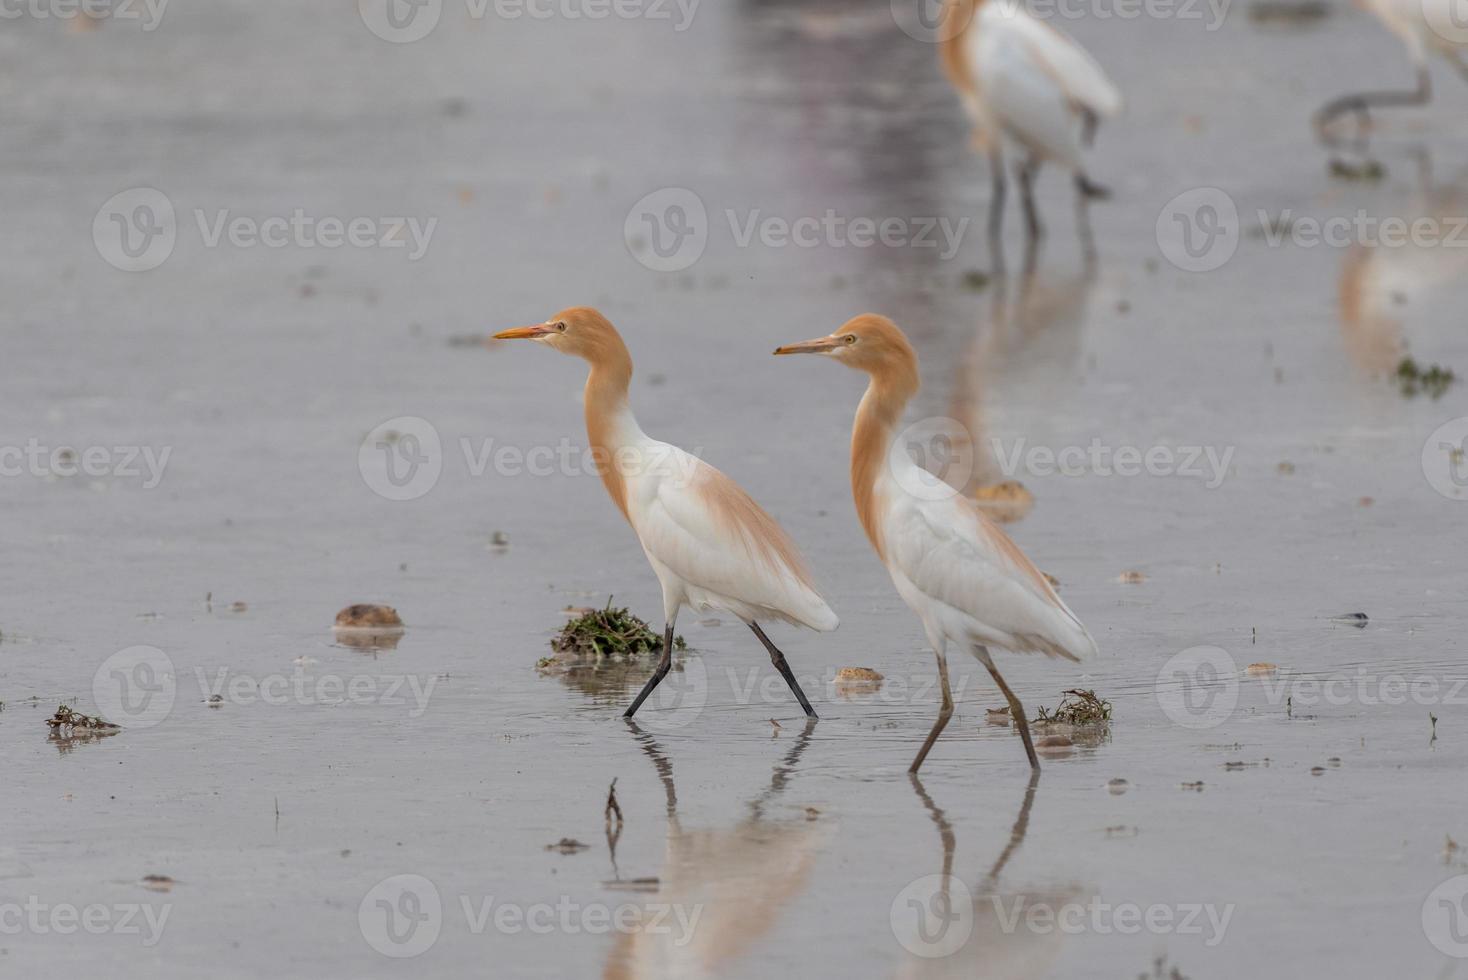 Cattle egrets stay in the fields for food, rest and fly photo